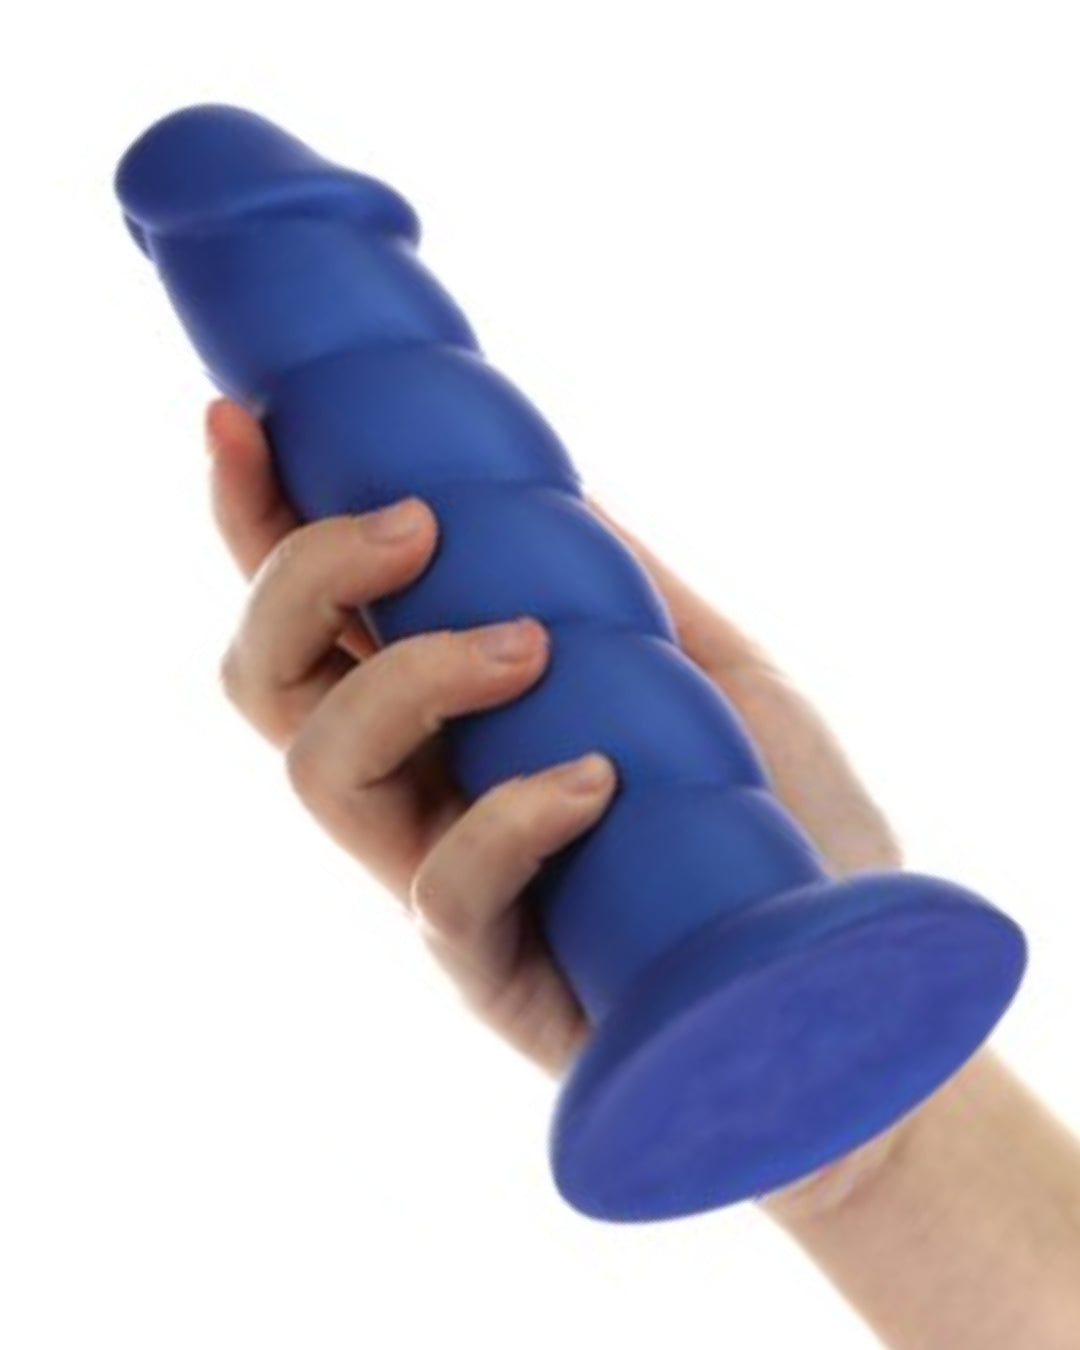 Fantasy Blue Unicorn Horn 8 Inch Silicone Dildo held in a hand on a white background